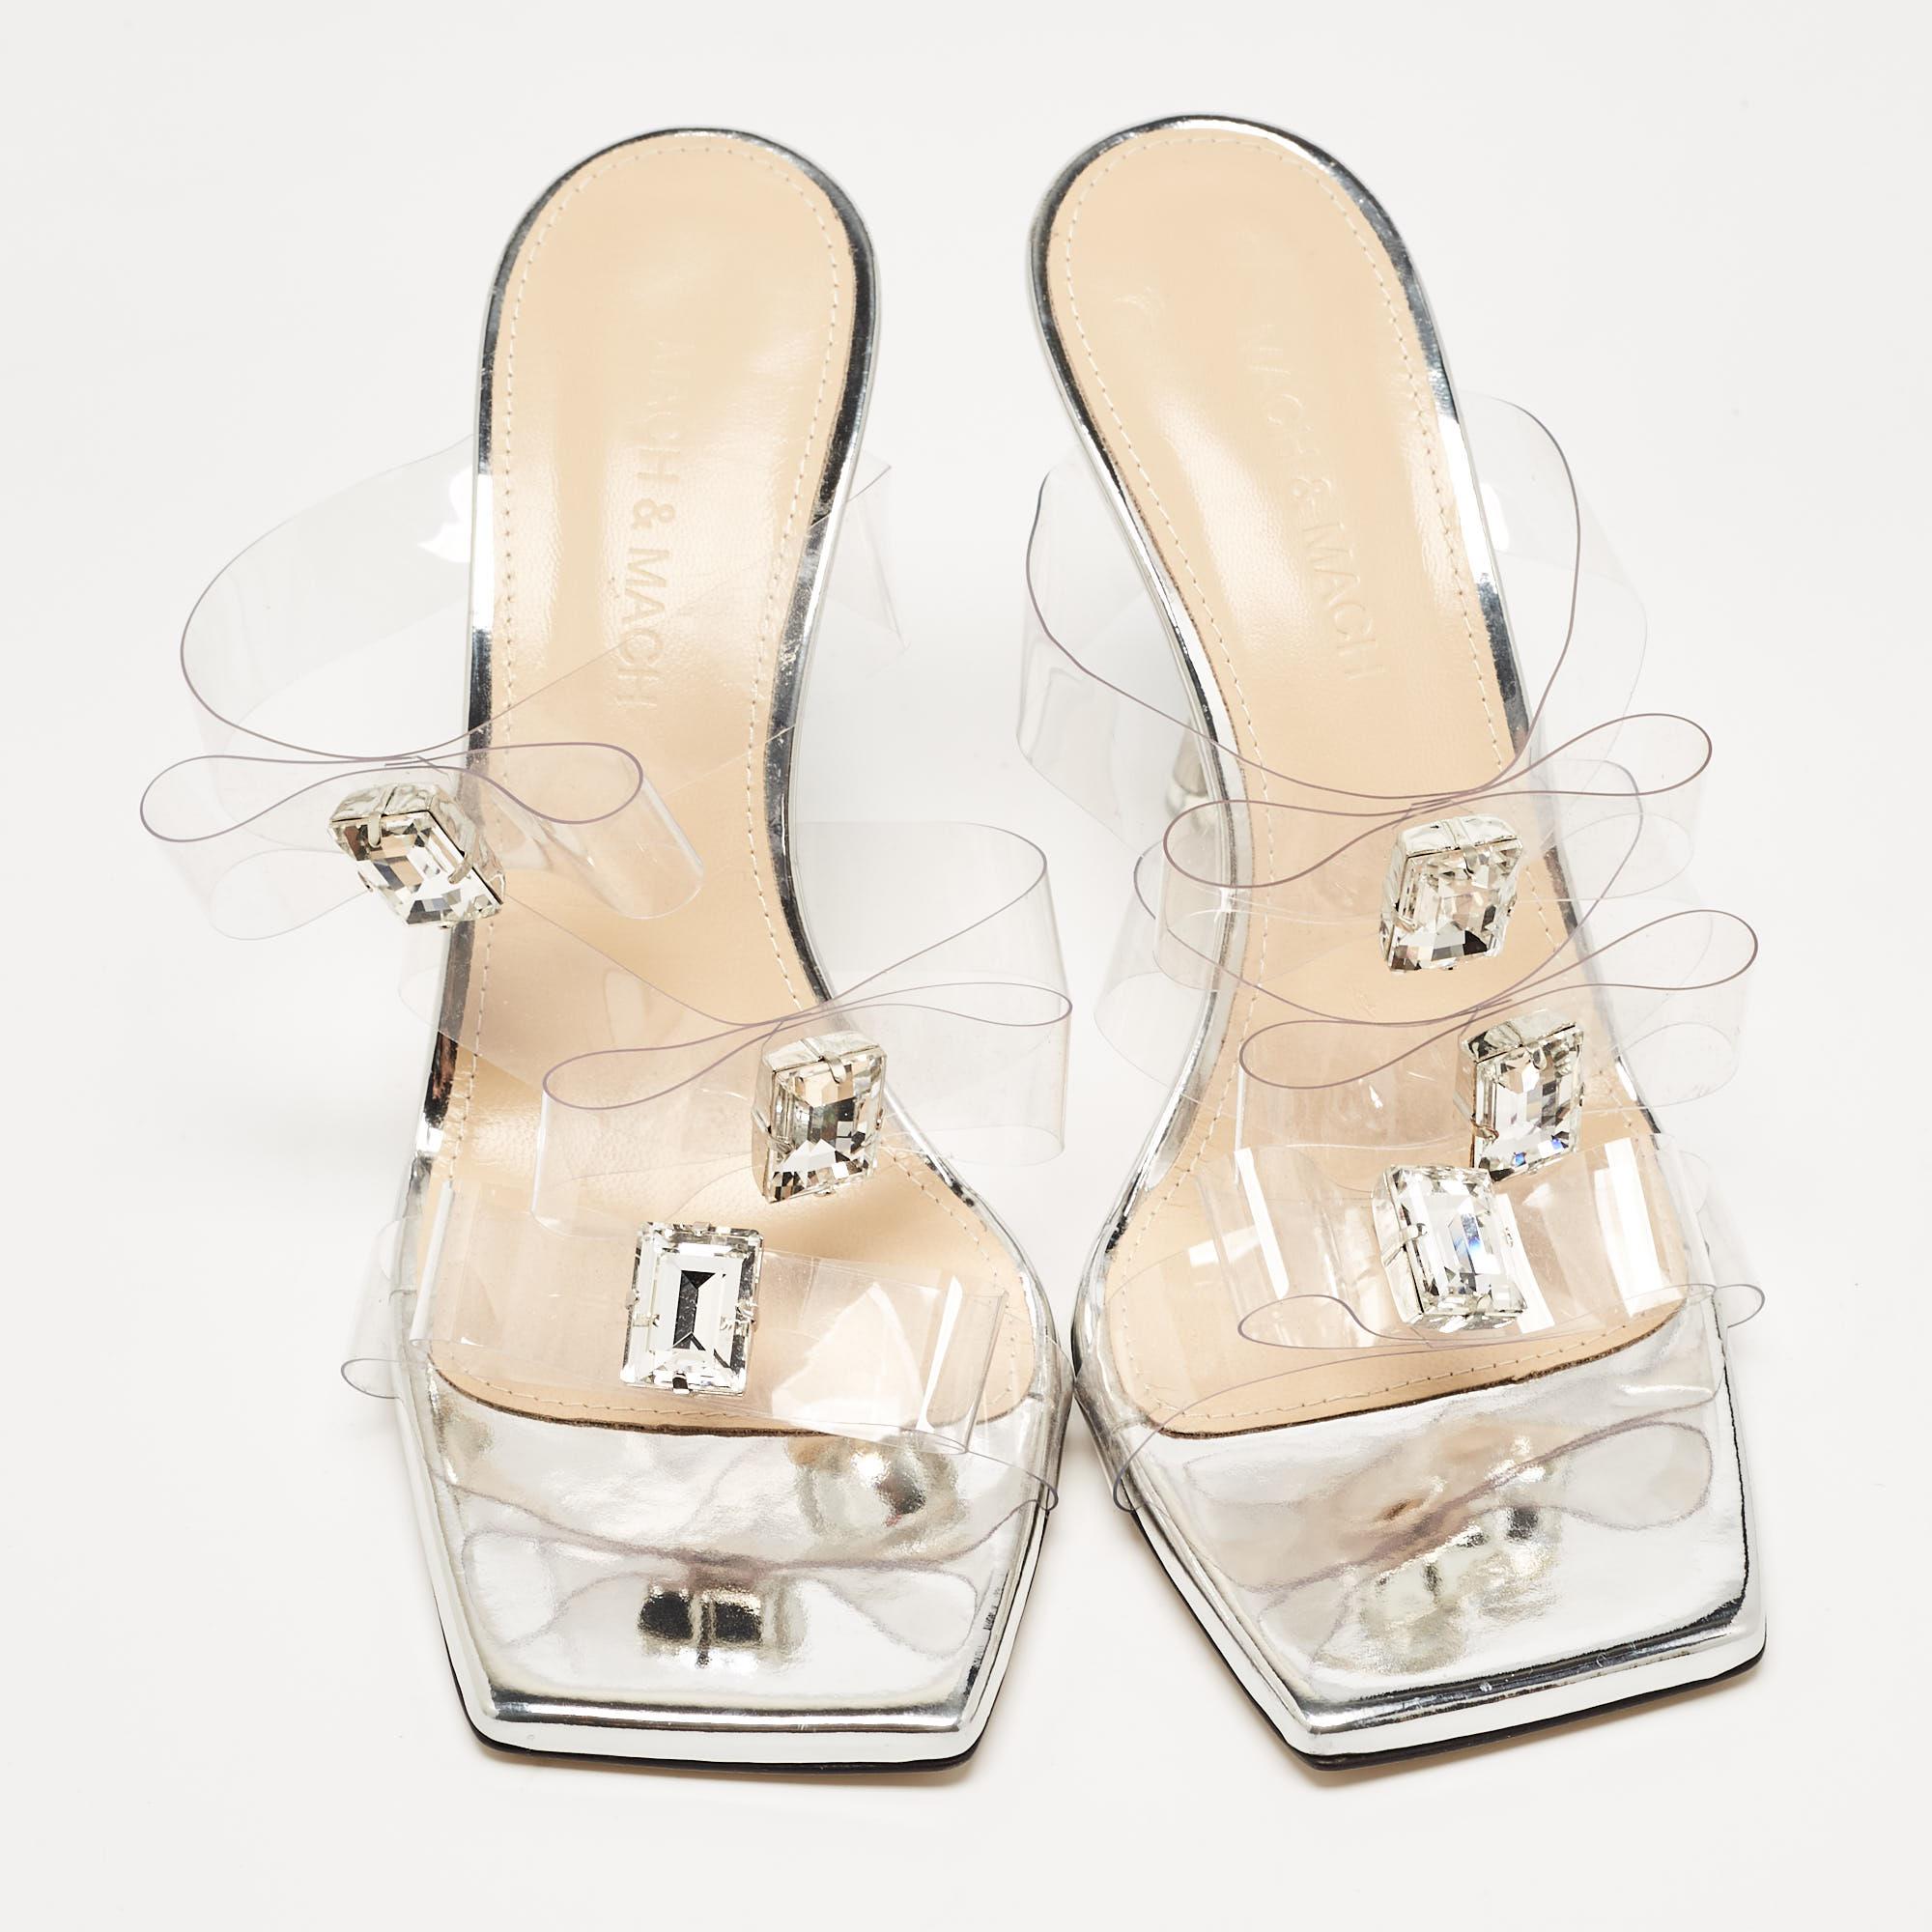 Slip into the epitome of playful luxury with Mach & Mach's sandals. Crafted with meticulous attention to detail, these sandals feature a charming French bow accent, they are crafted using PVC for a captivating, statement-making look.

Includes: